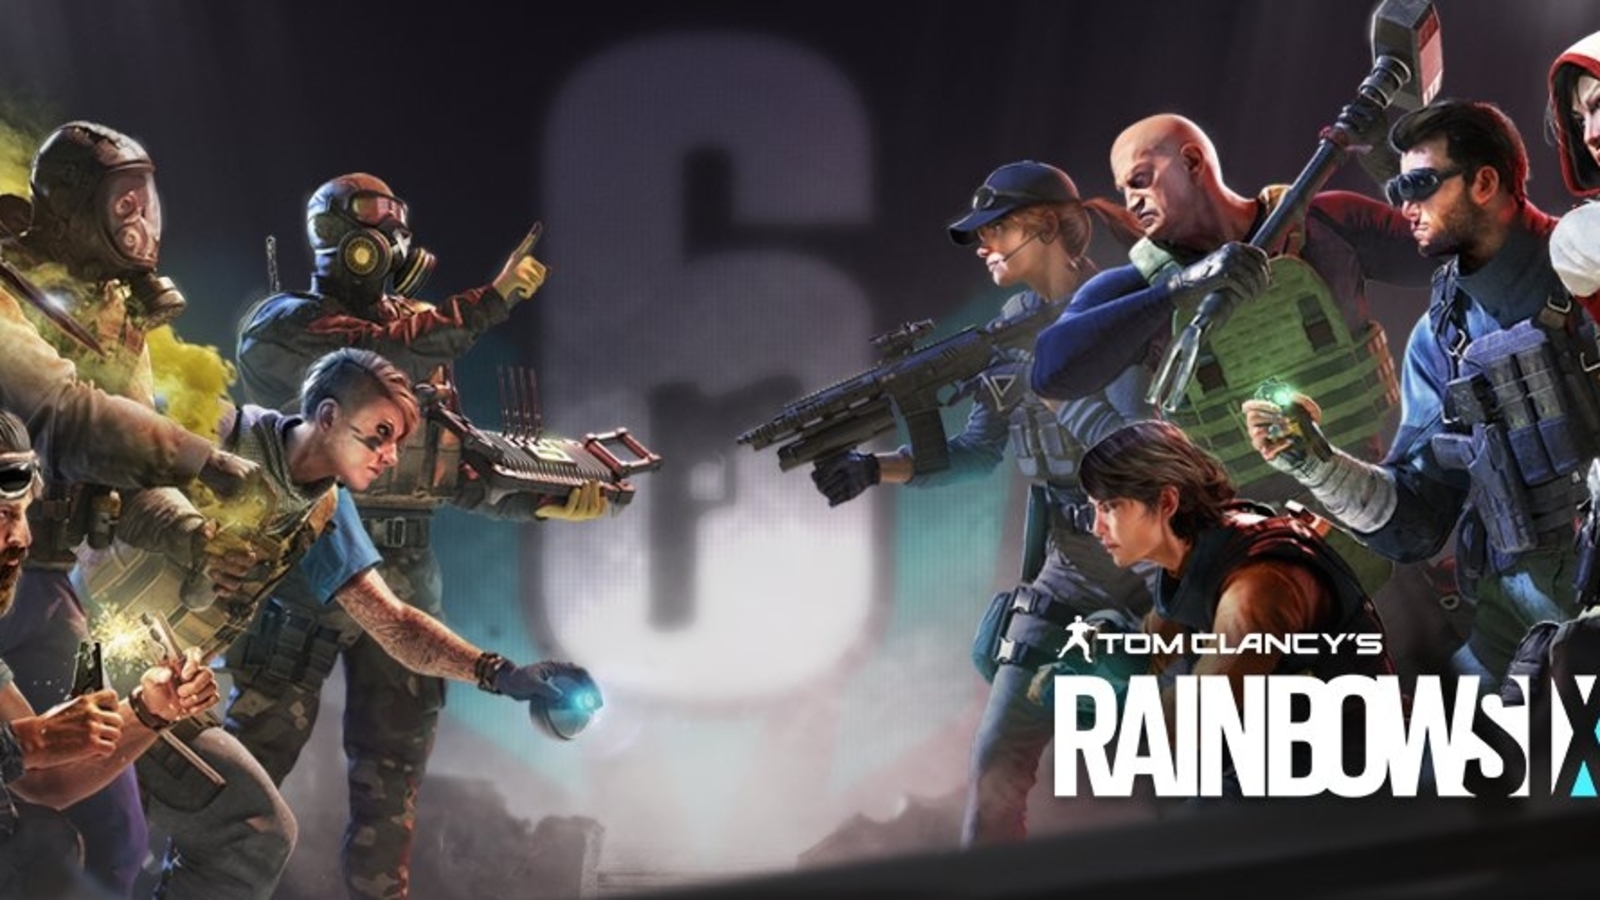 Rainbow Six Mobile release date speculation, beta, and more